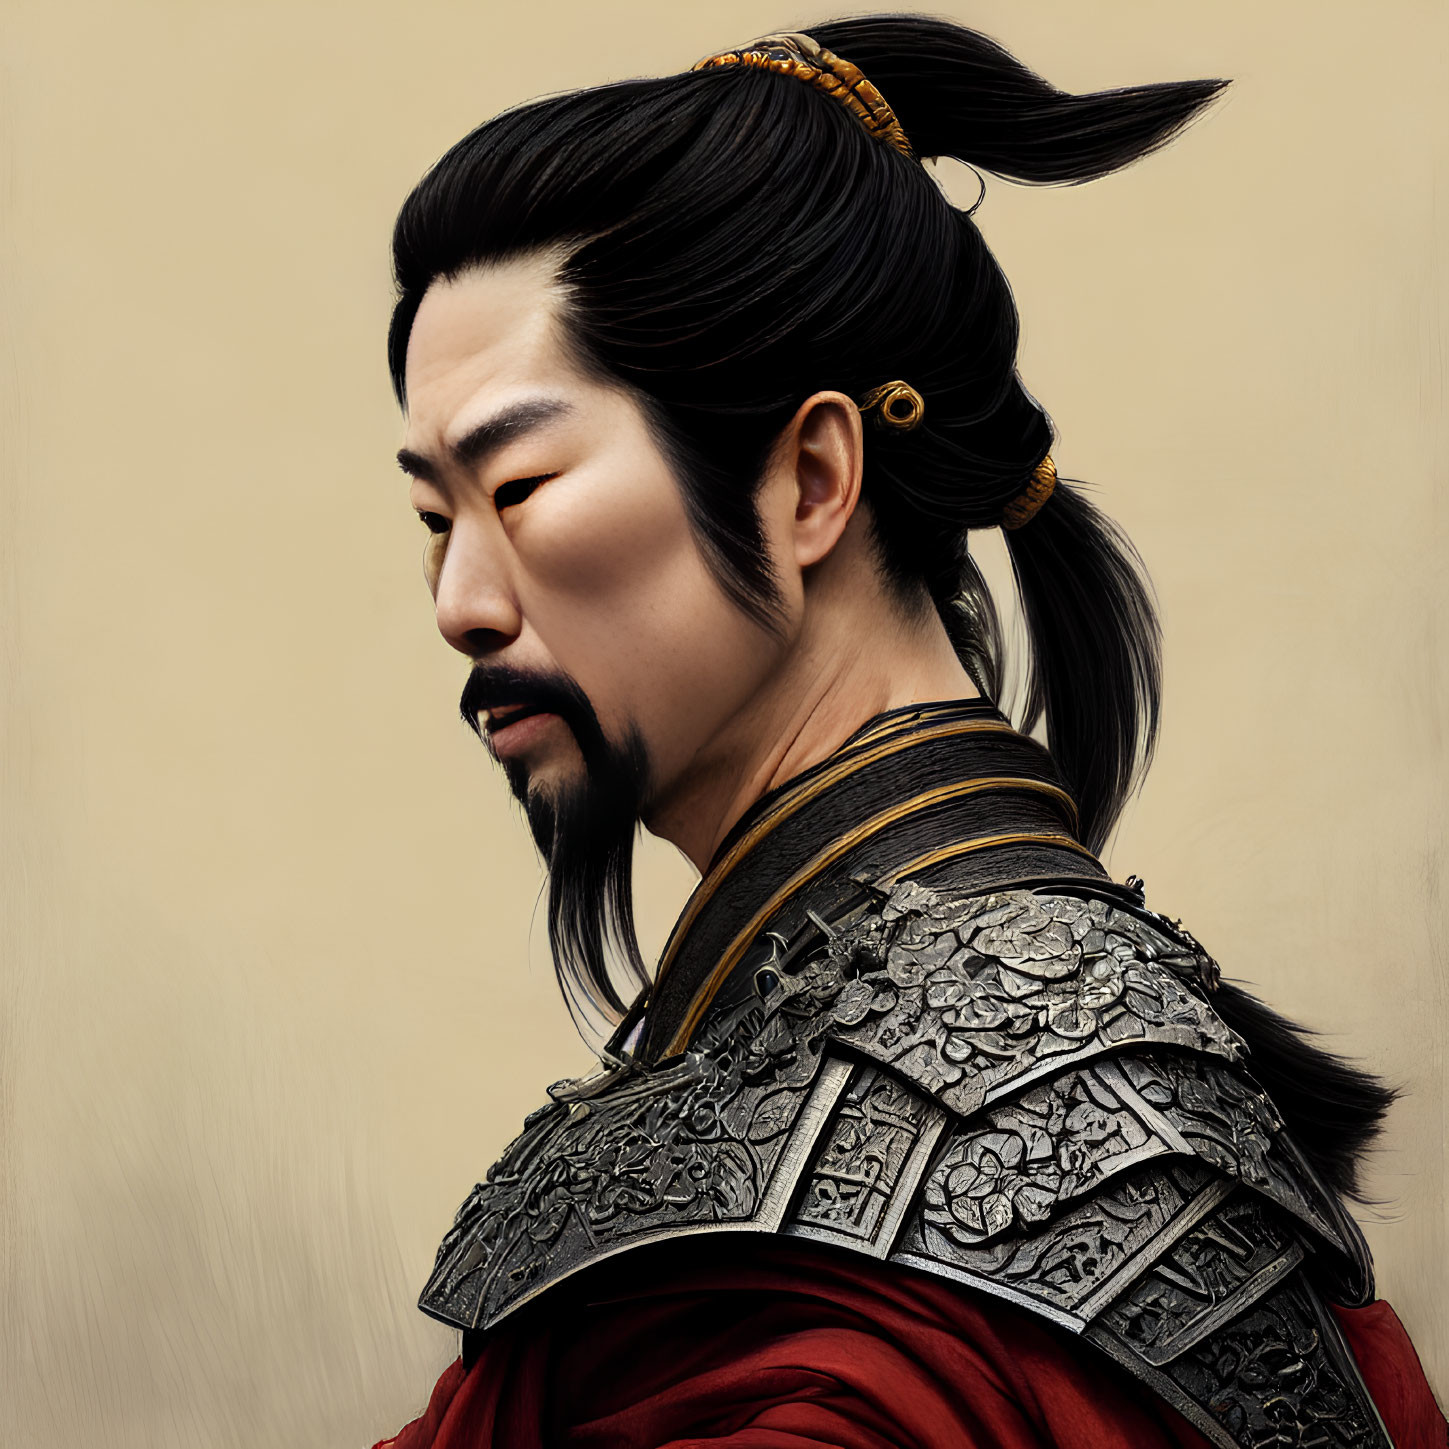 Historical Asian warrior digital painting with topknot, mustache, ornate armor, and red